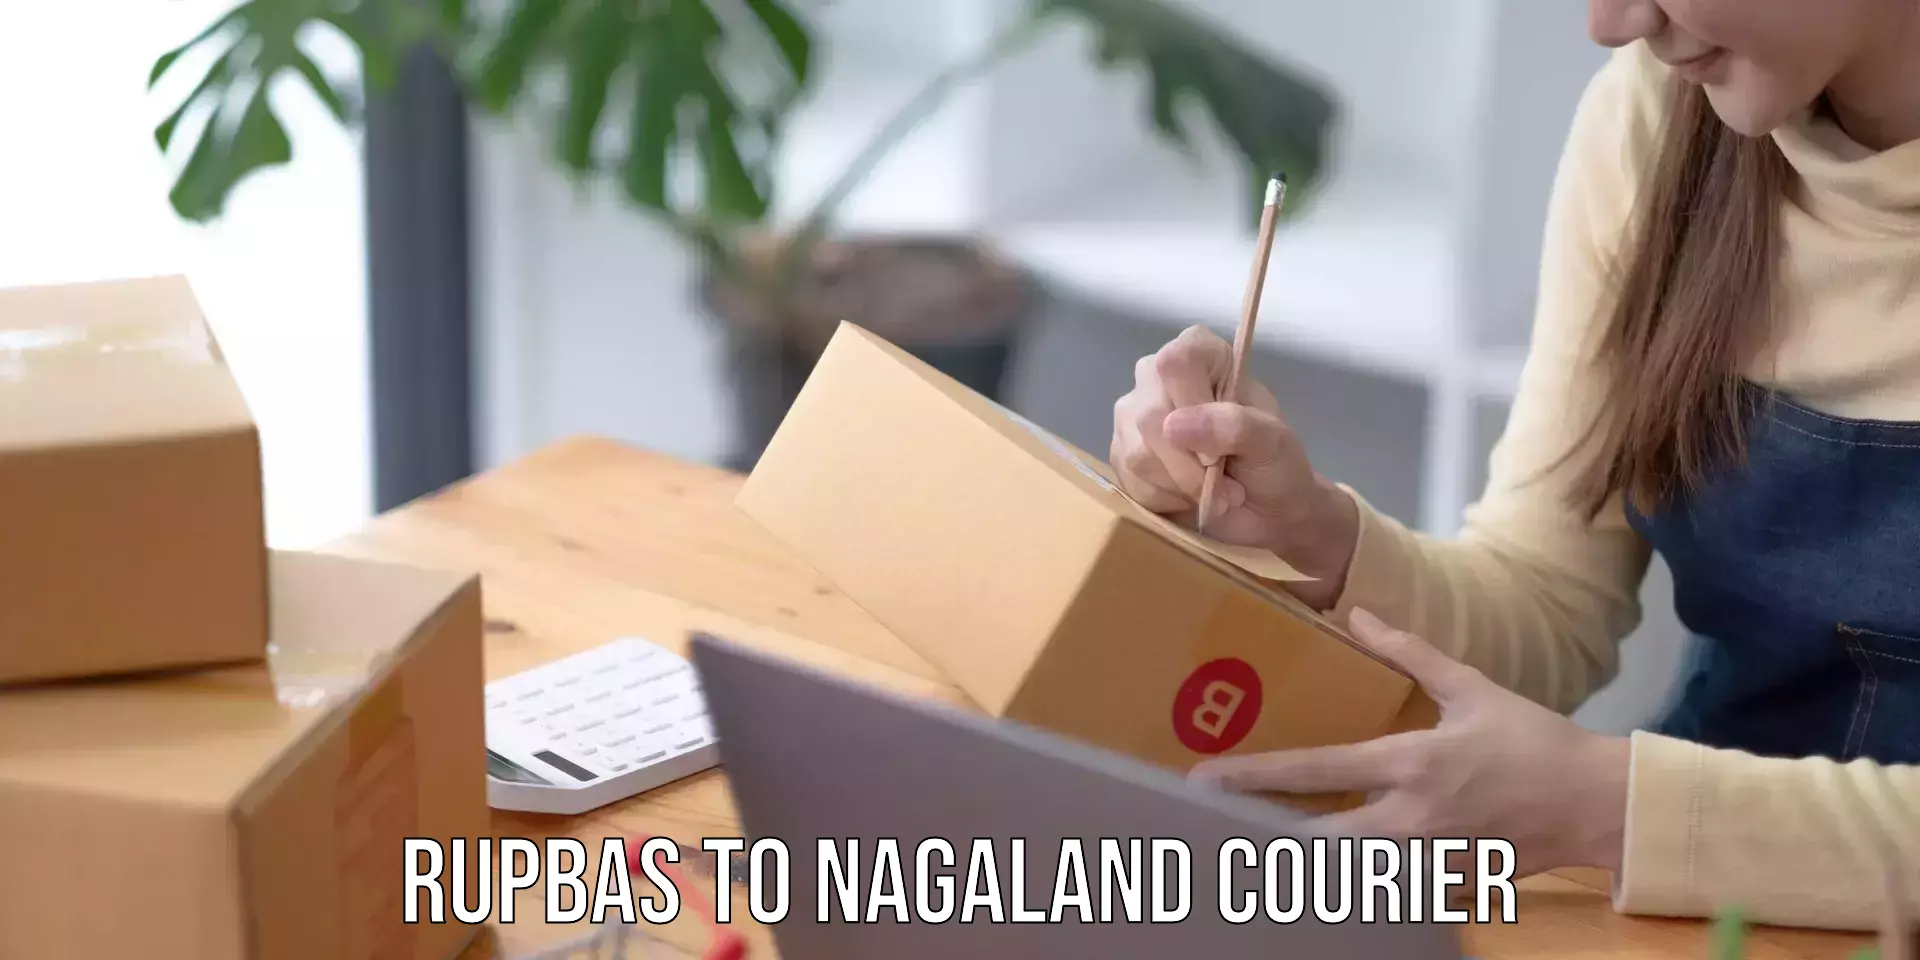 Cash on delivery service Rupbas to Nagaland